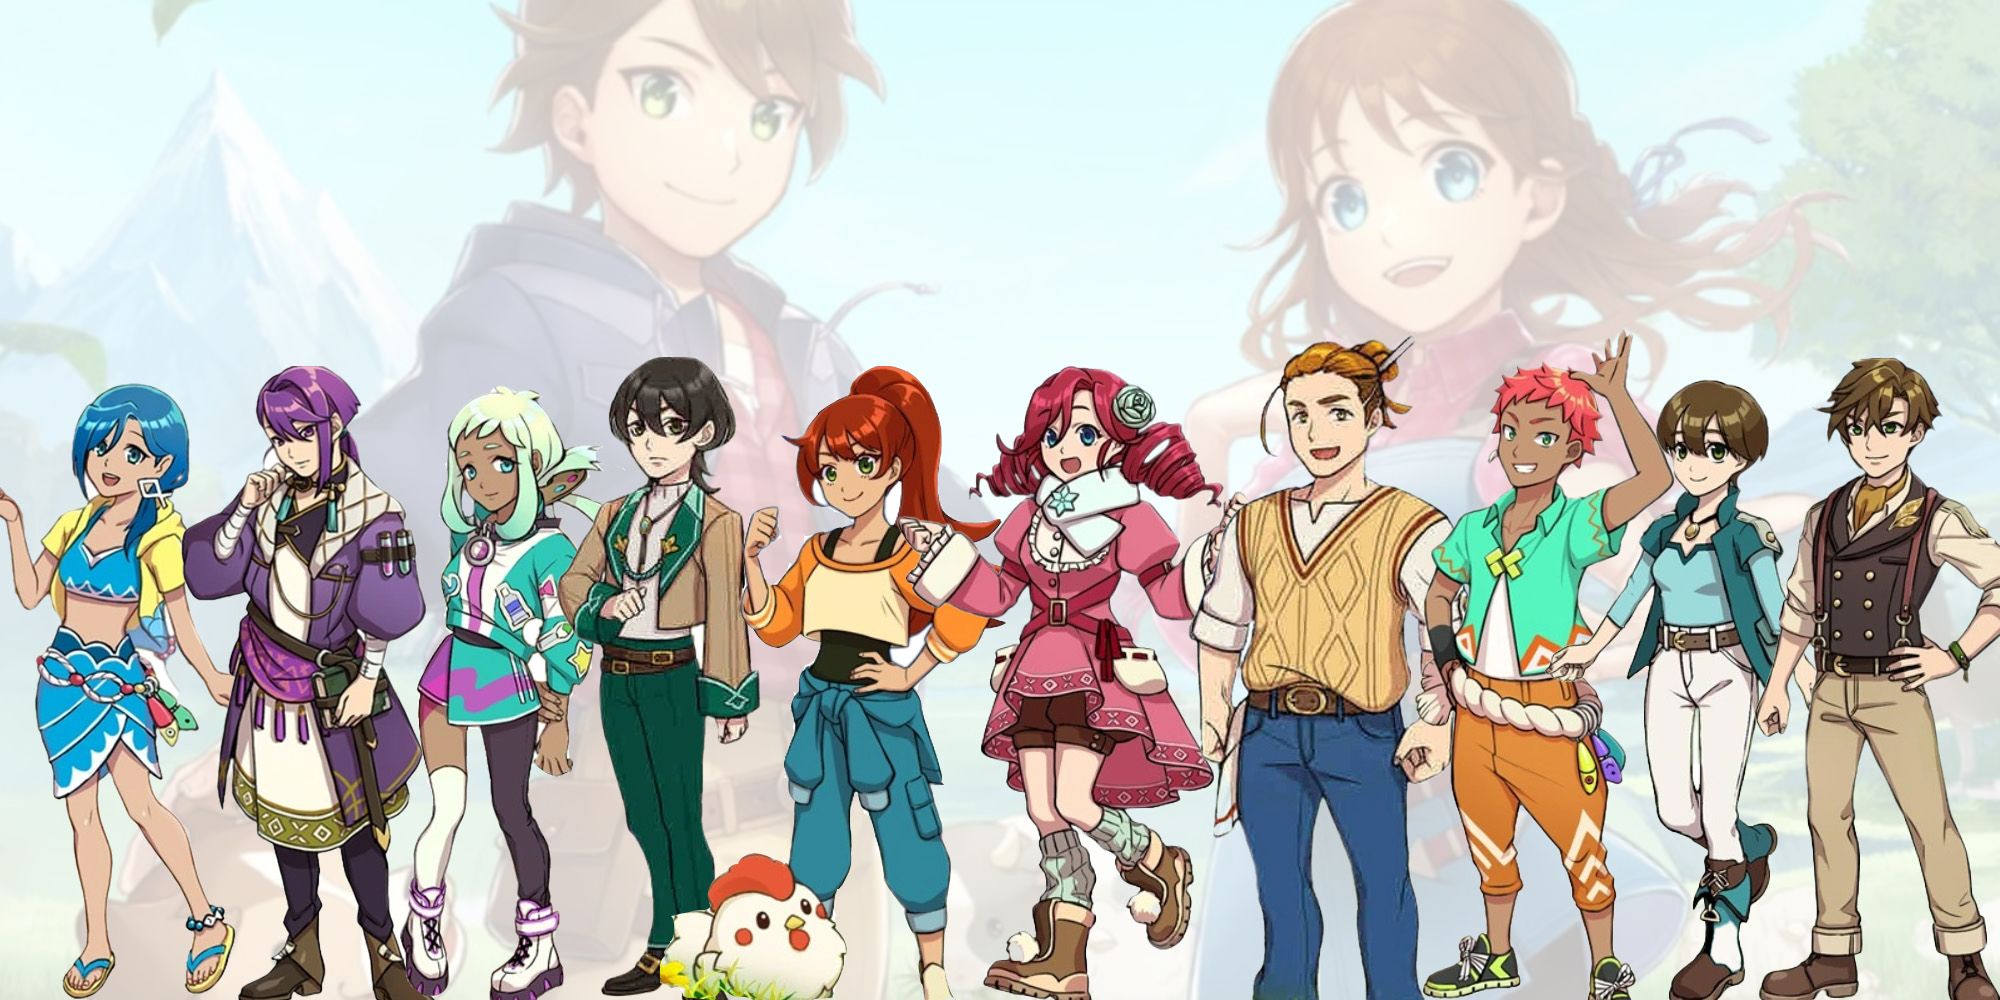 The ten candidates available for marriage from Harvest Moon: The Winds of Anthos, all lined up.